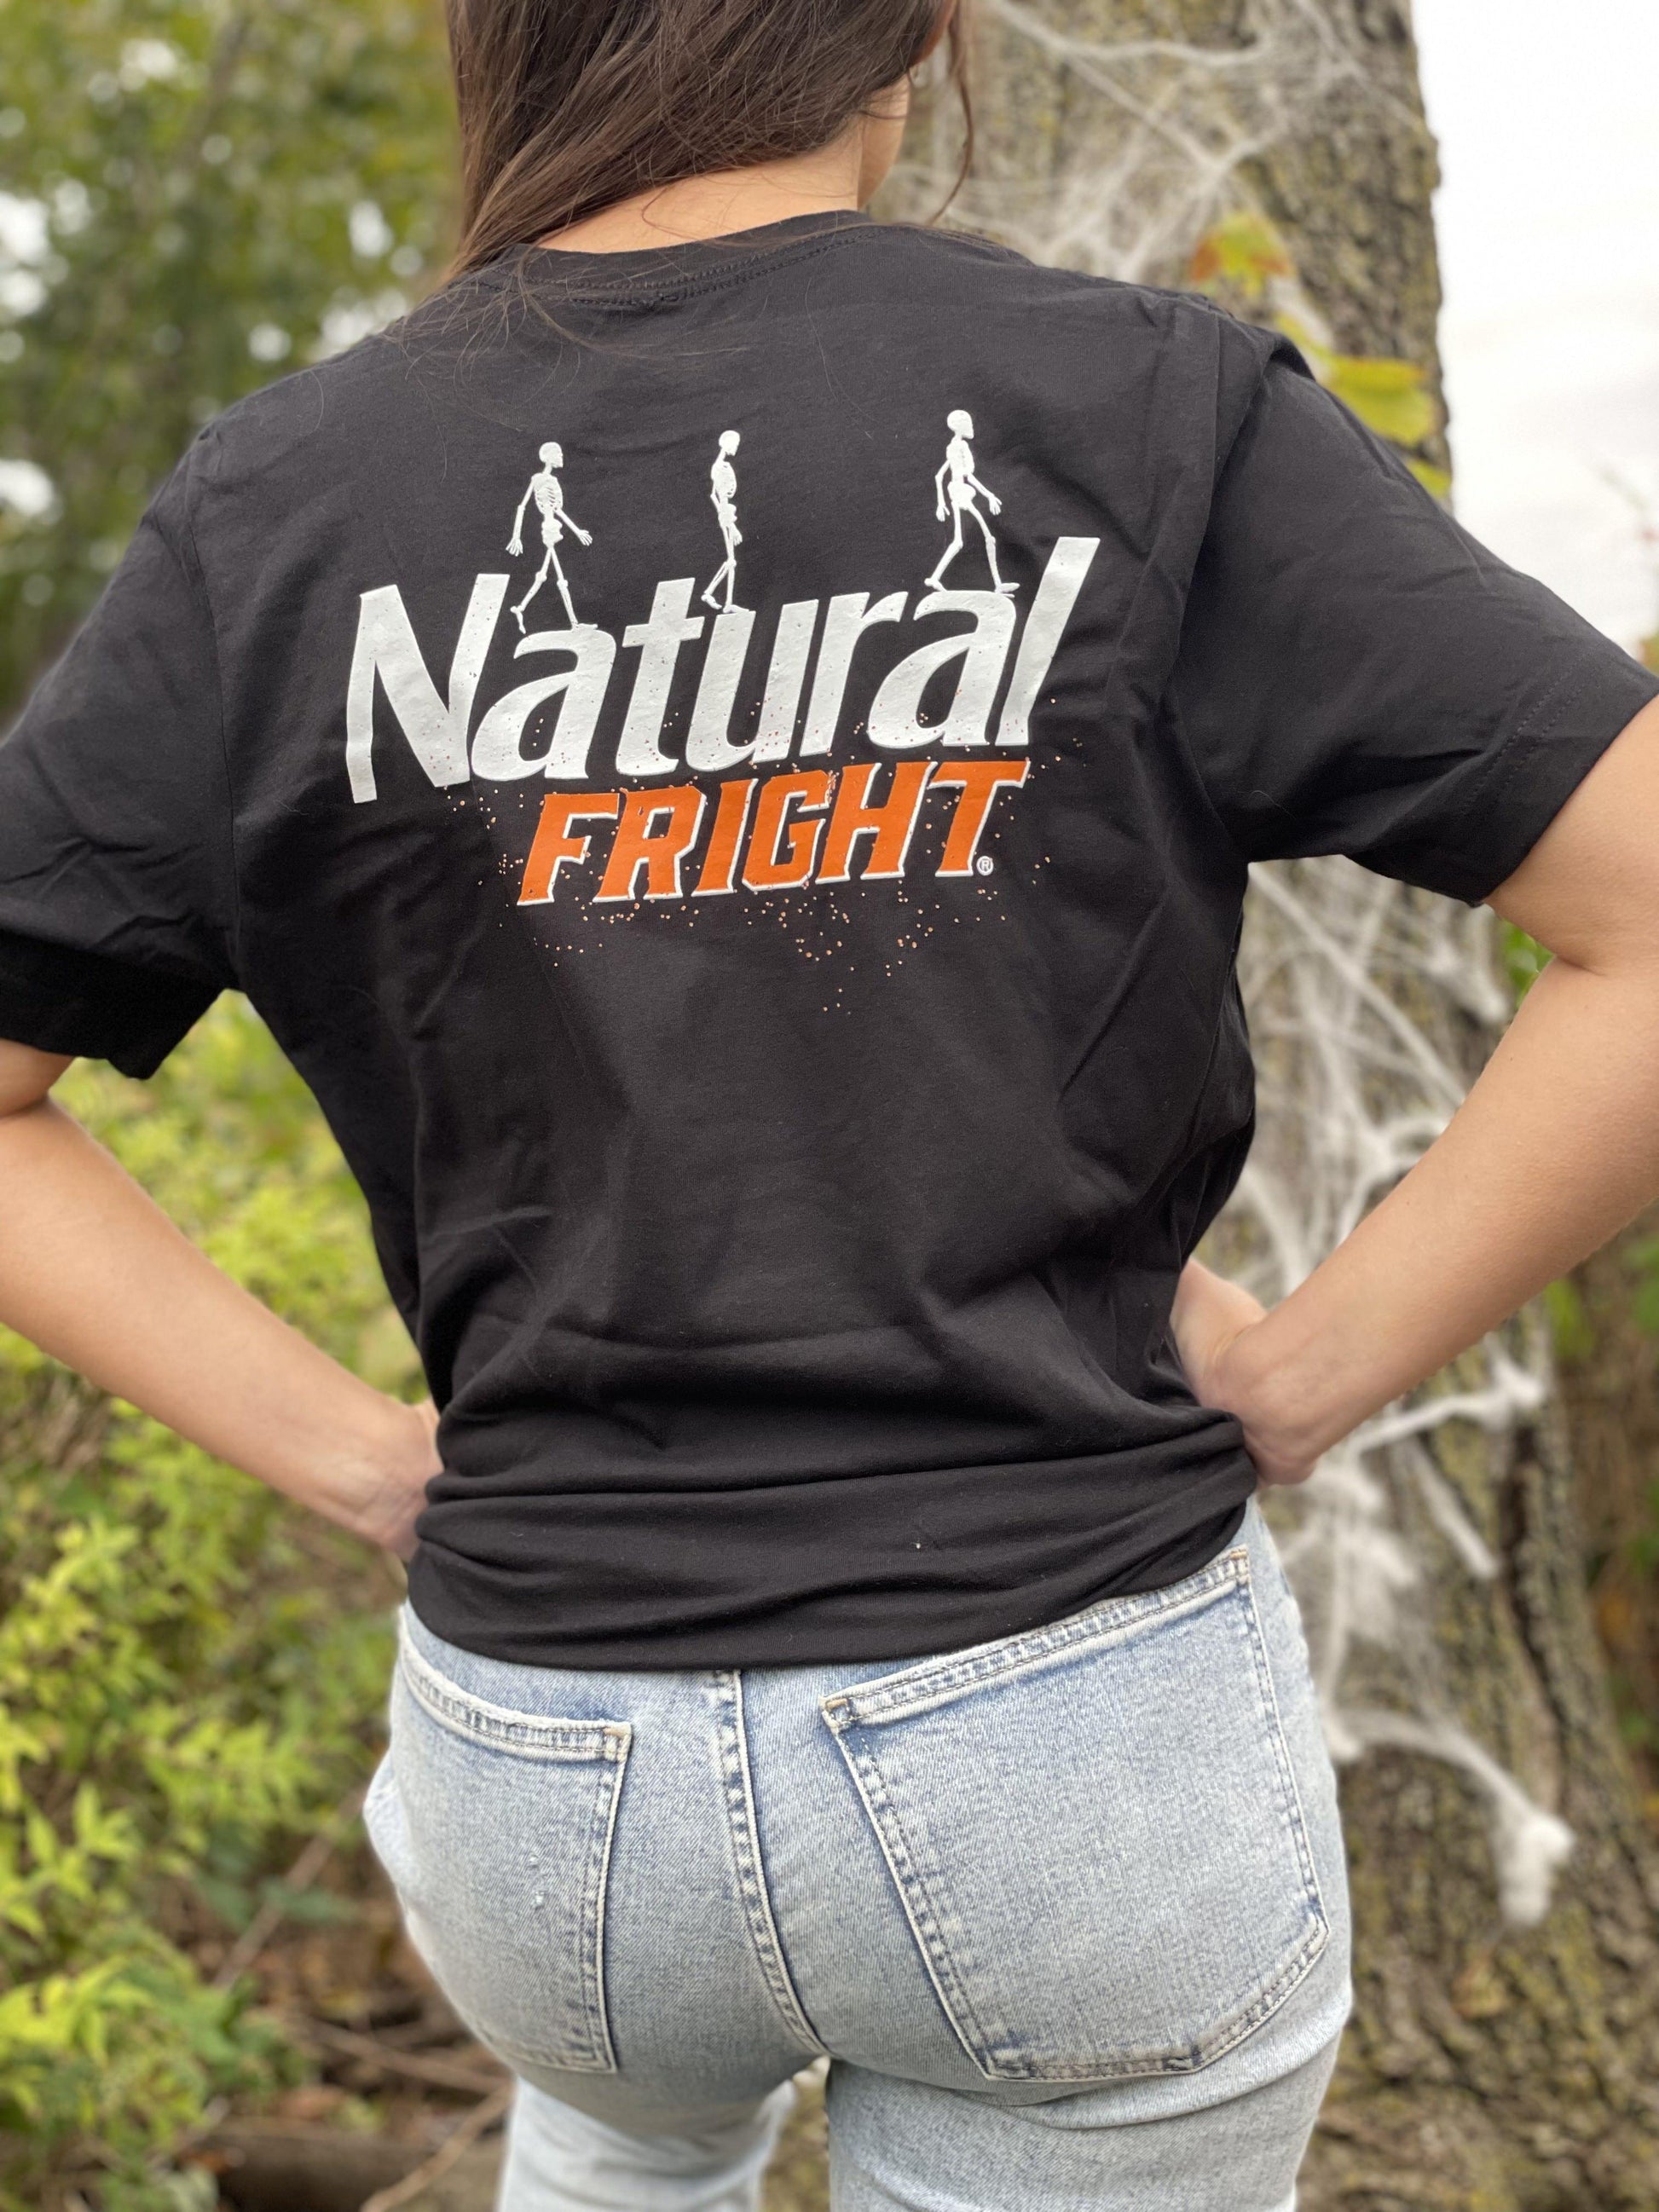 woman wearing black natural light backprint t shirt with natural light logo in white and orange on the back of shirt with white skeletons walking across logo